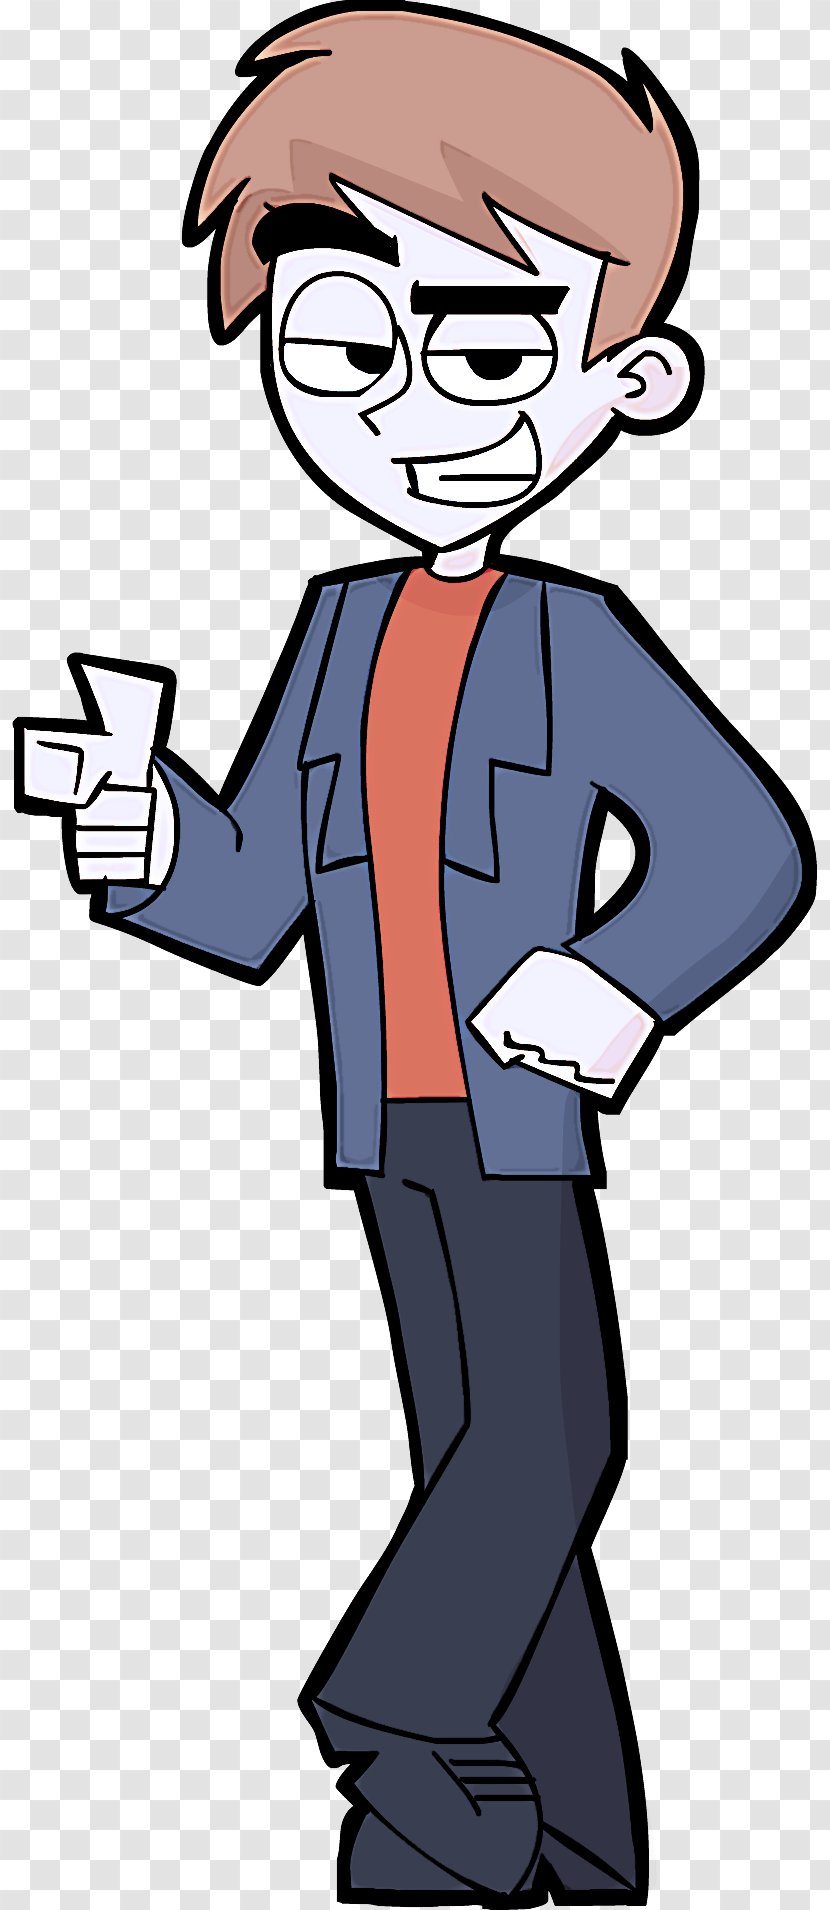 Cartoon Finger Thumb Pleased Gesture - Businessperson Transparent PNG